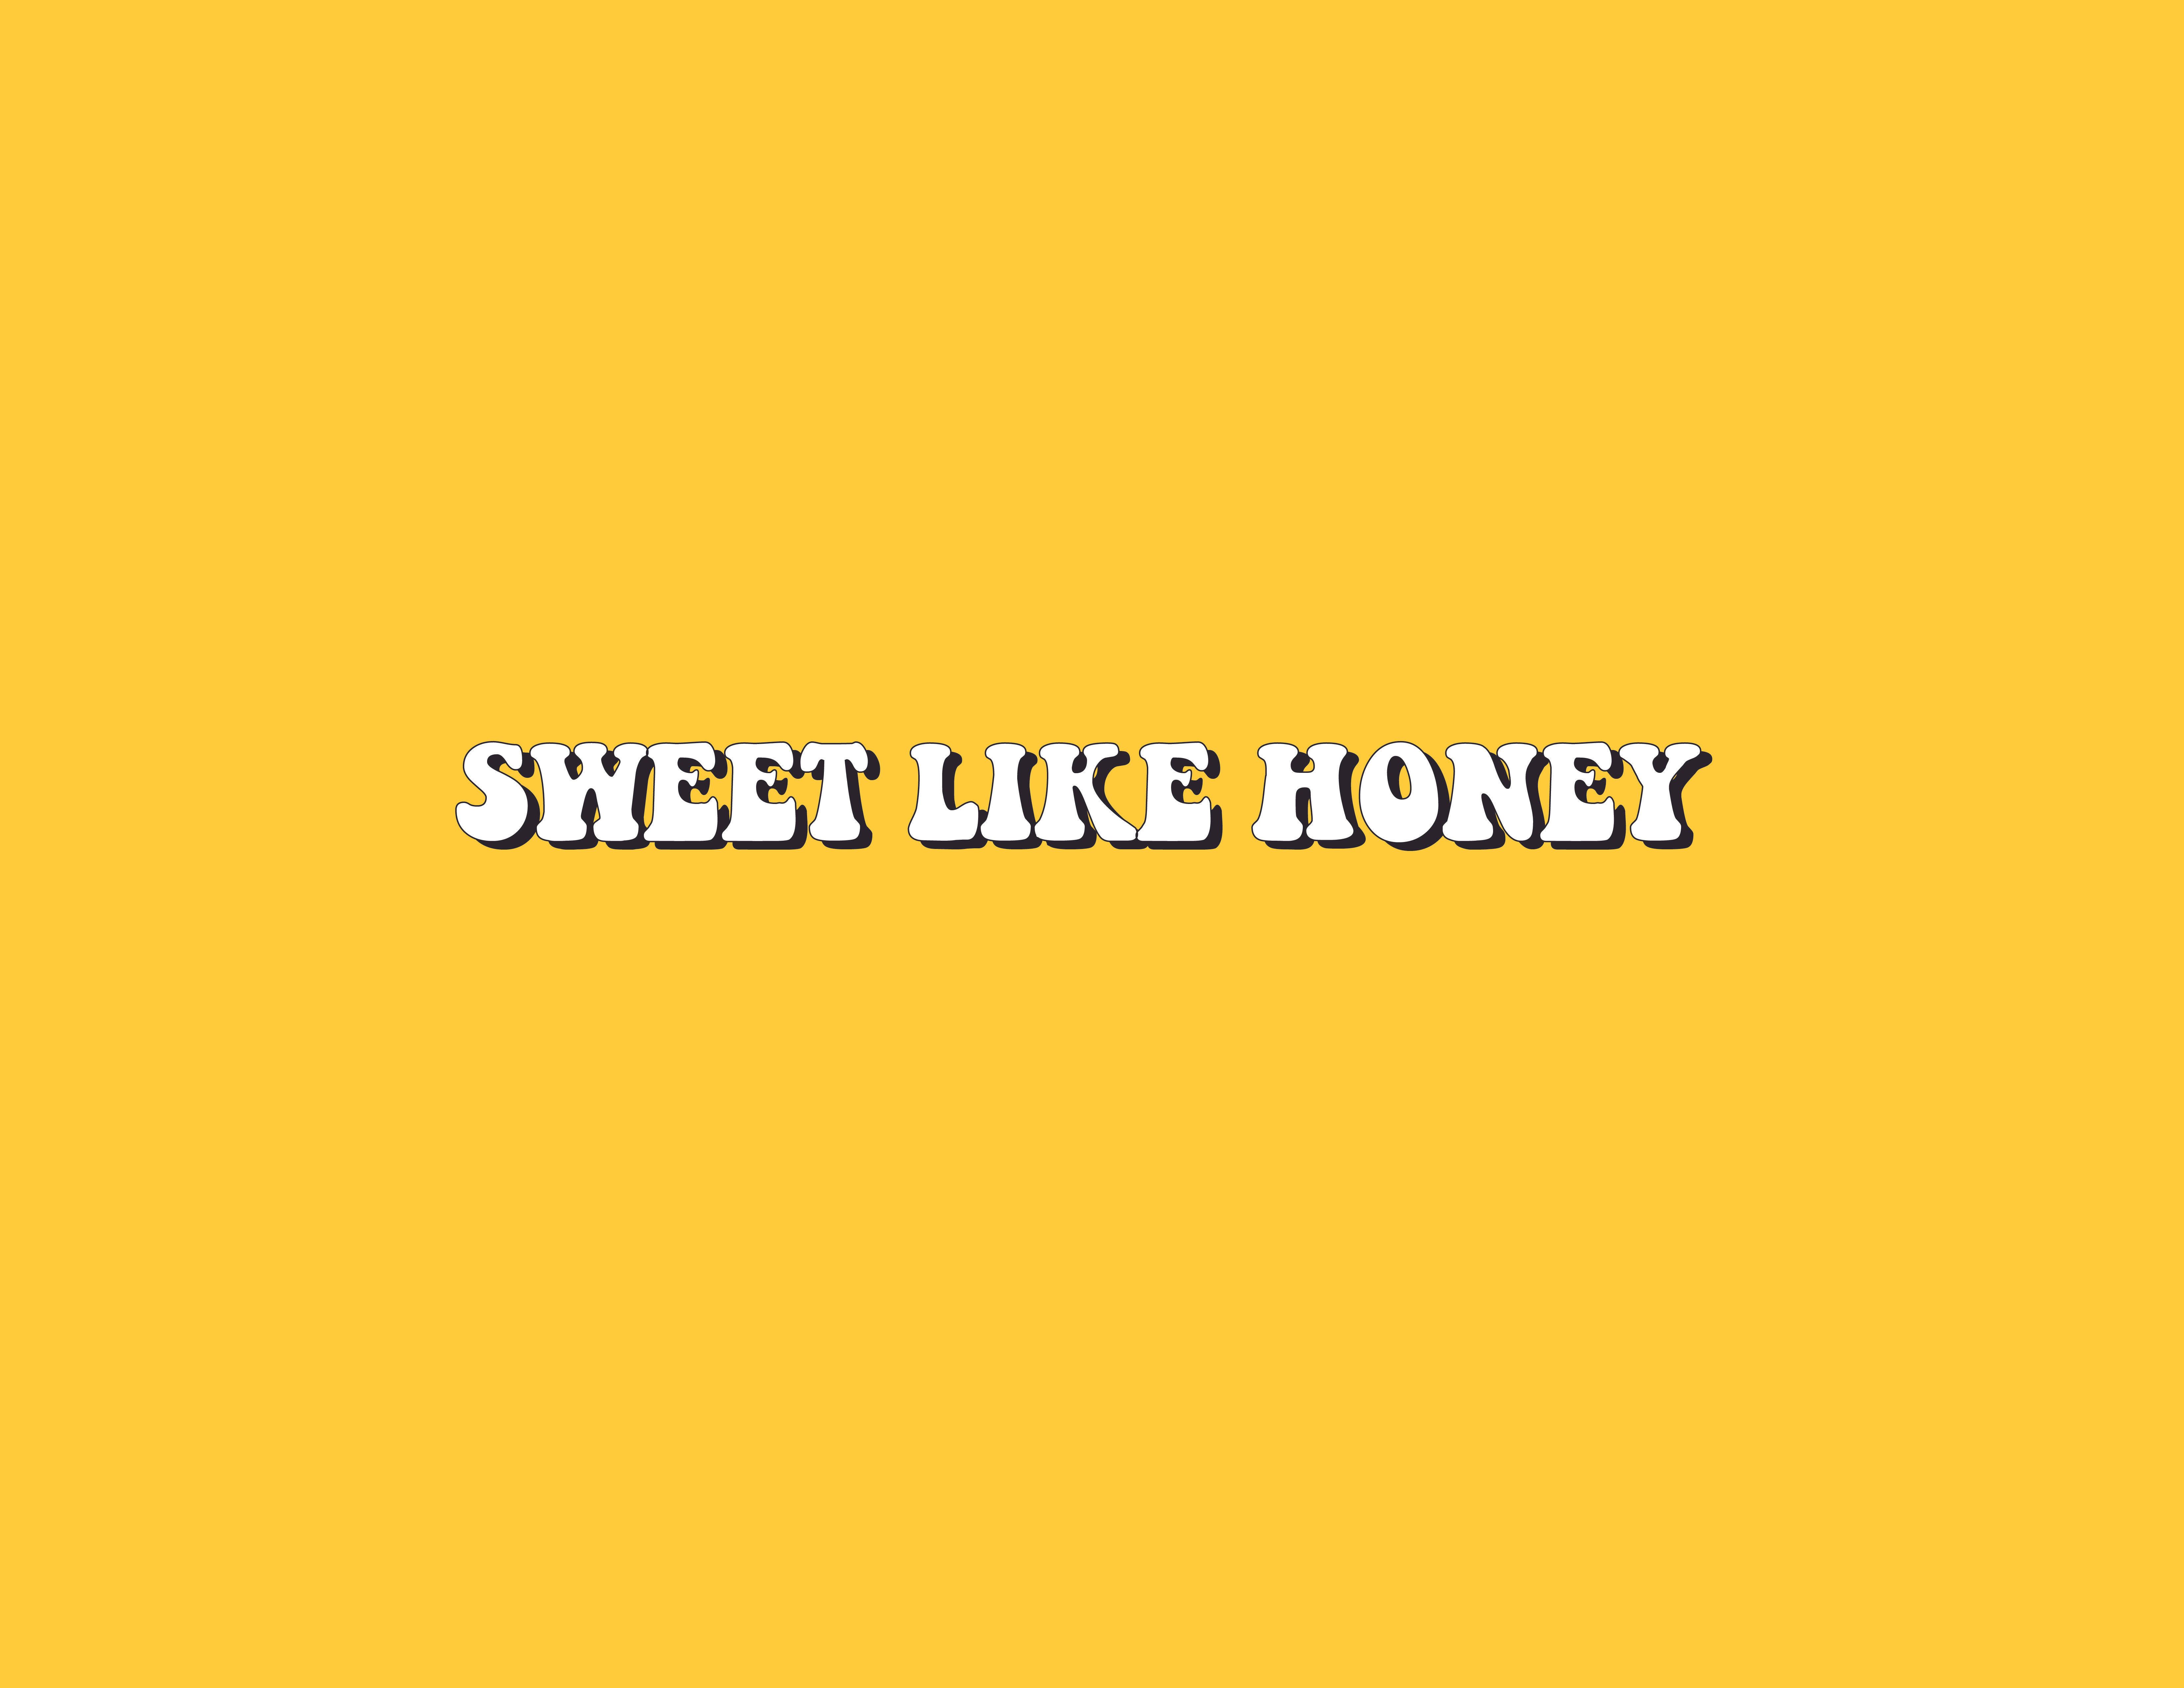 Sheet Like Honey is a collection of short stories - Yellow, honey